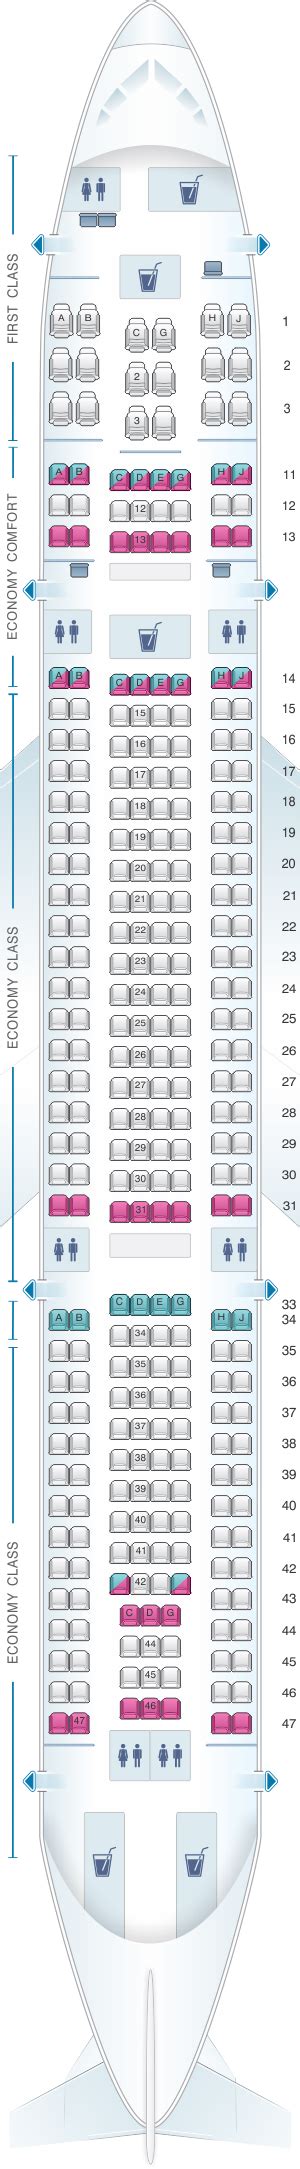 Hawaiian airlines airbus a330 seat map. Lufthansa Airbus A330 Seat Maps Lufthansa. Lufthansa Airbus A330 Seat Maps. Lufthansa operates only one model model of Airbus, A330-300. As of 2022, the company has 14 A330-300 aircraft in its fleet. The aircraft is roomy.The Airbus A330-300 can carry 295 passengers in three classes, 335 in two classes, and up to 440 if the aircraft has only ... 